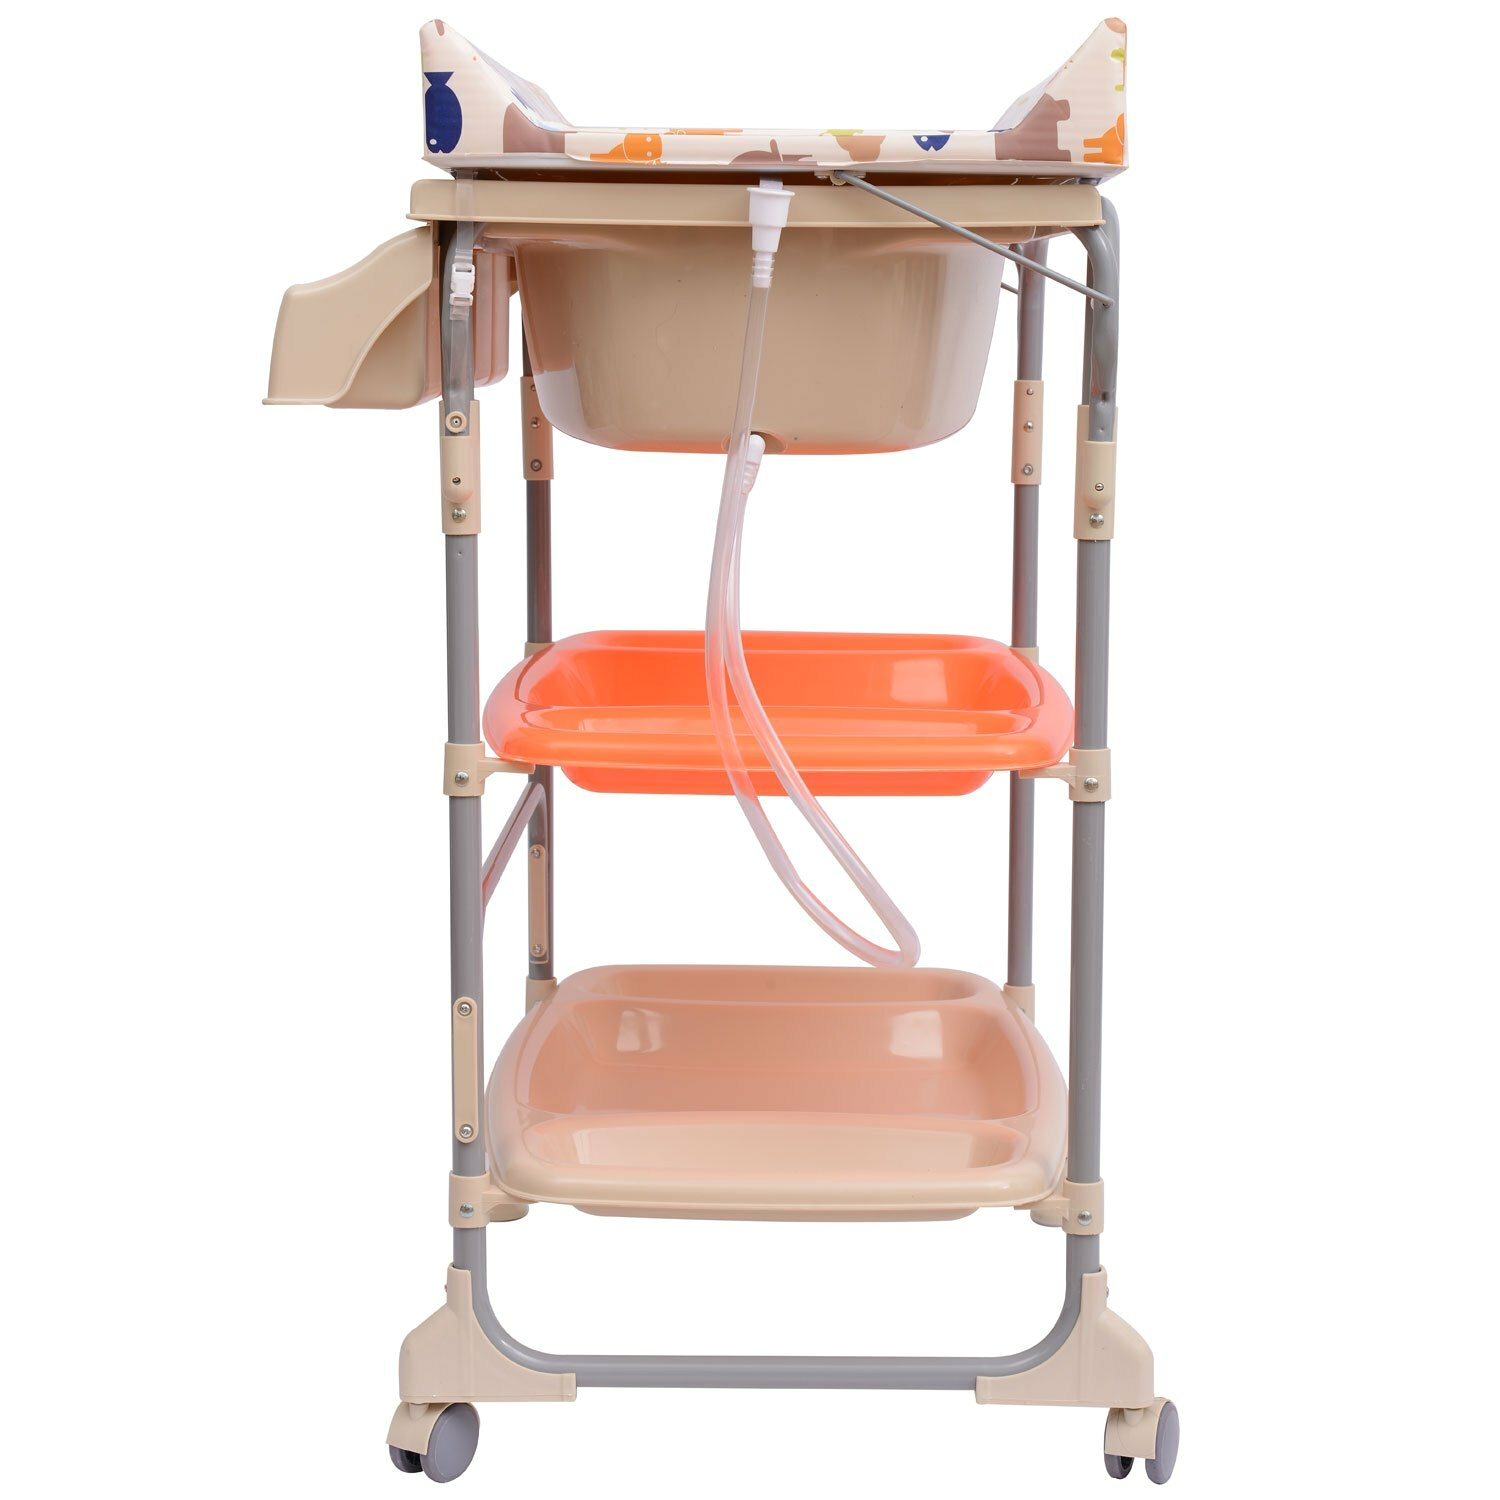 Hom Baby Unit Changing Station with a Bath Changing Table and Storage Trays HMCM1770